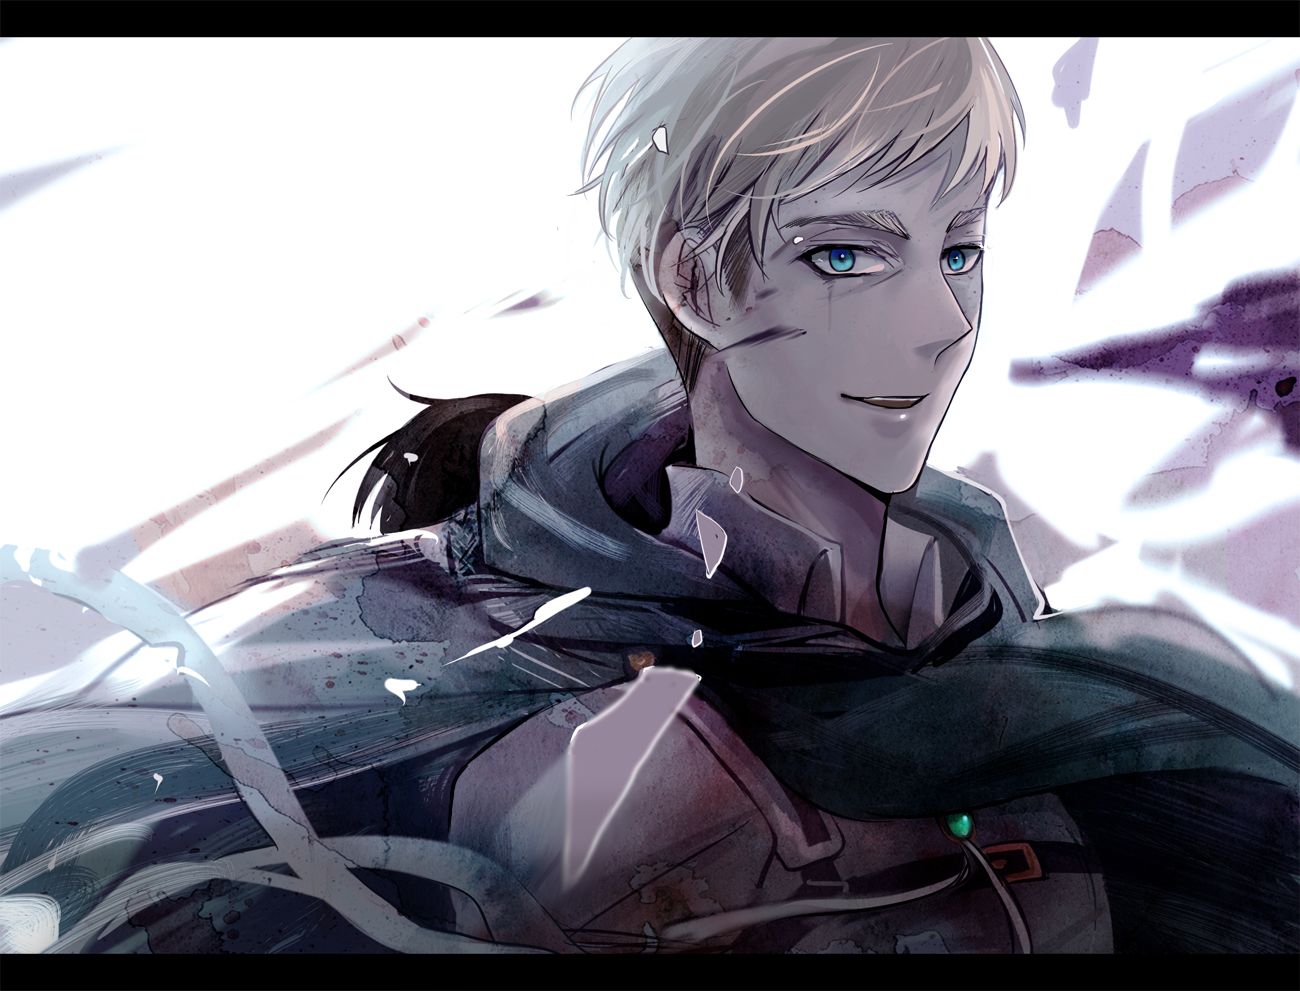 Download wallpaper from anime Attack On Titan with tags: Windows Shingeki No Kyojin, Erwin Smith